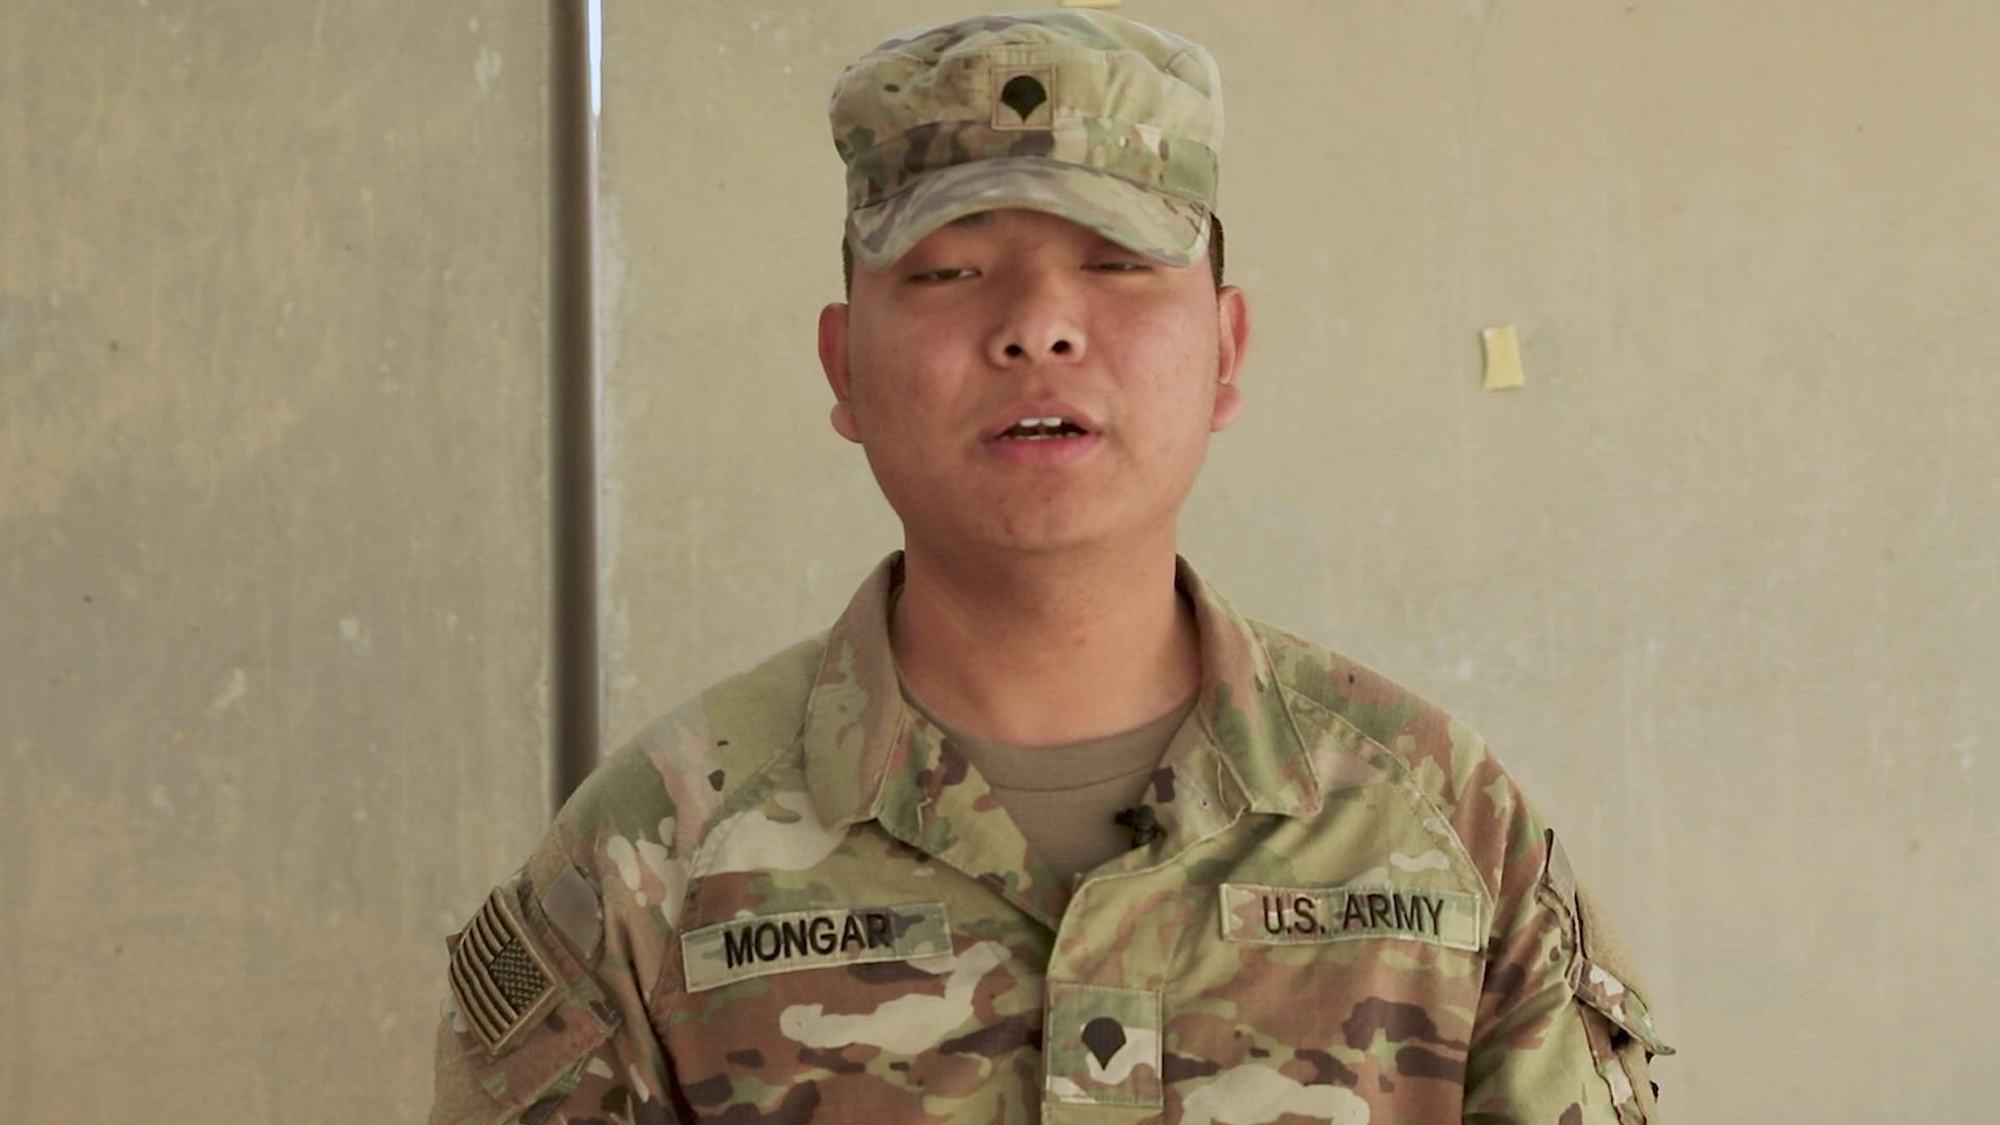 Pennsylvania Army National Guard Soldier, Spc. Som Mongar, 28th Infantry Division, wishes the U.S. Army Reserve a happy 115th birthday. (U.S. Army Reserve video by Spc. Christian Cote)